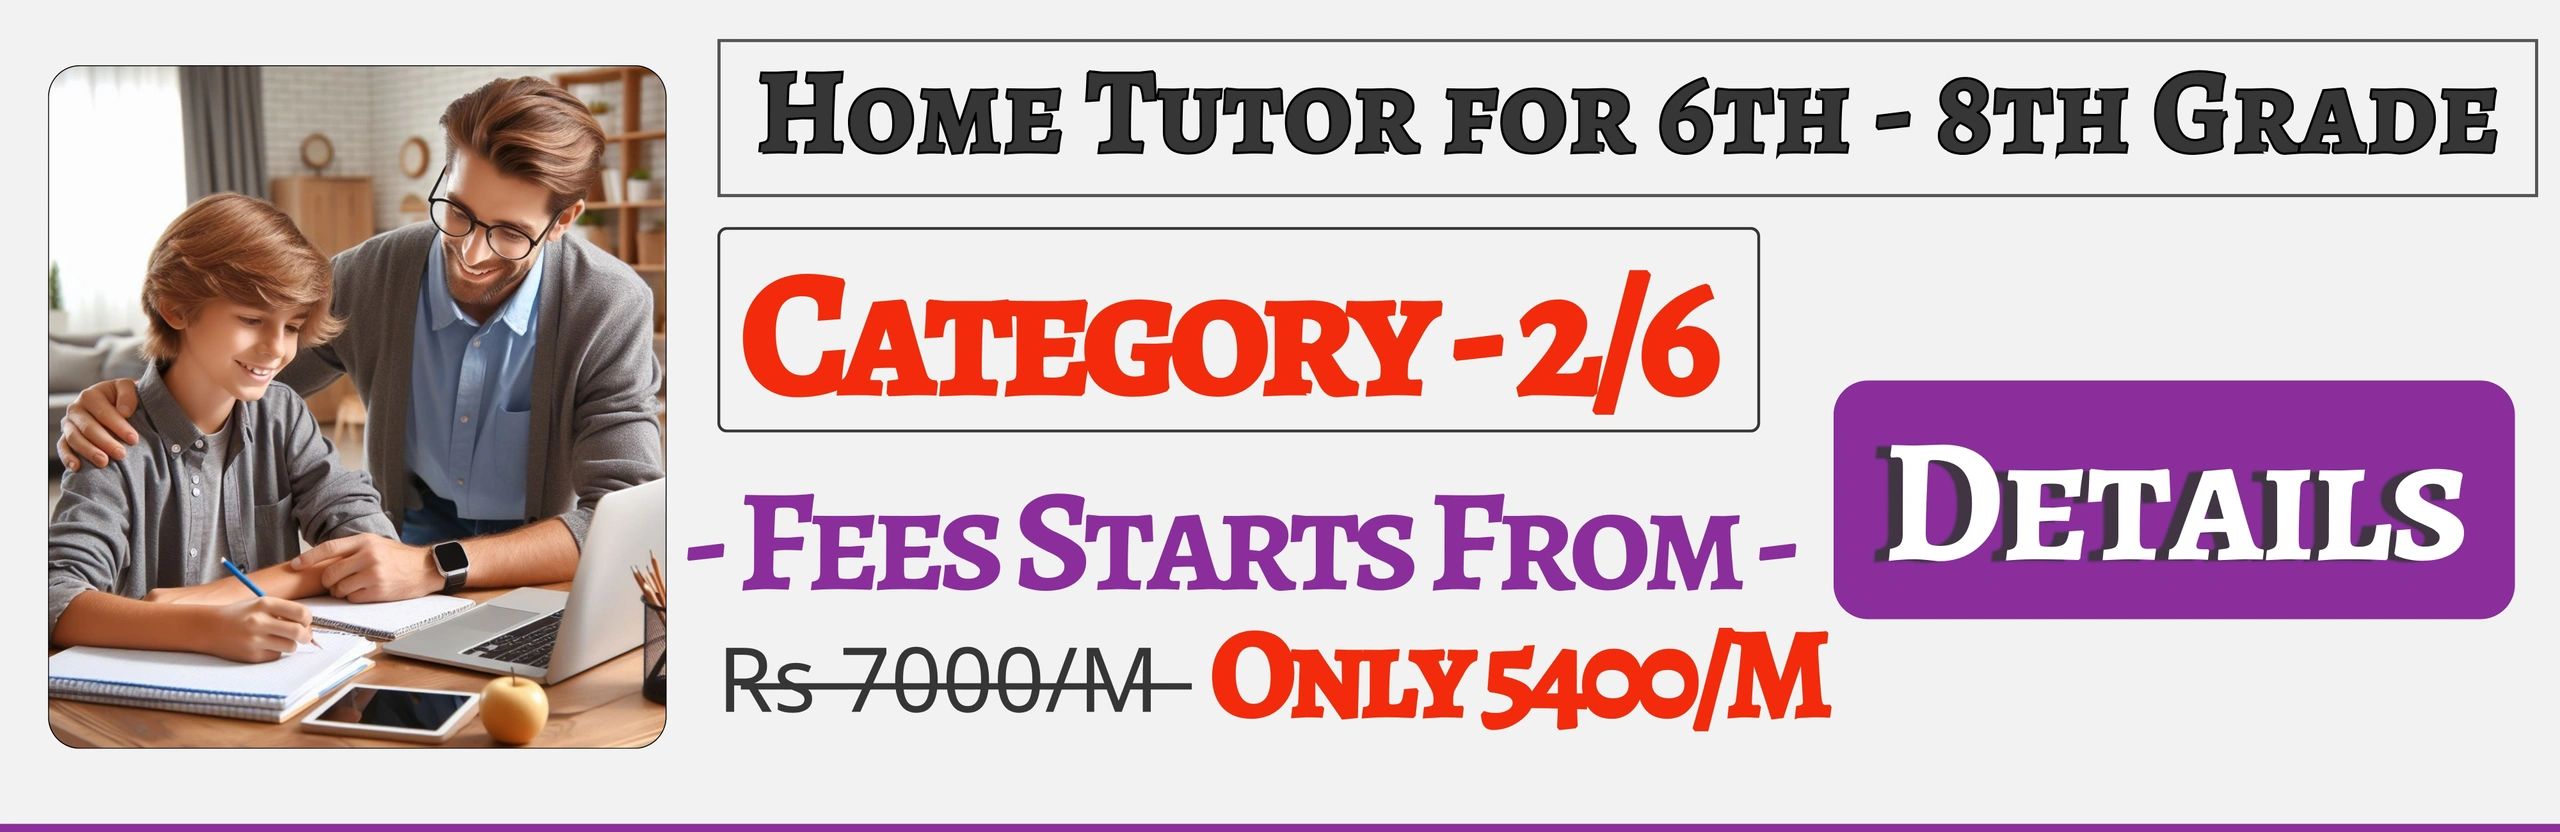 Book Best Home Tuition Tutors For 6th 7th & 8th In Jaipur Fees Only 5400/M